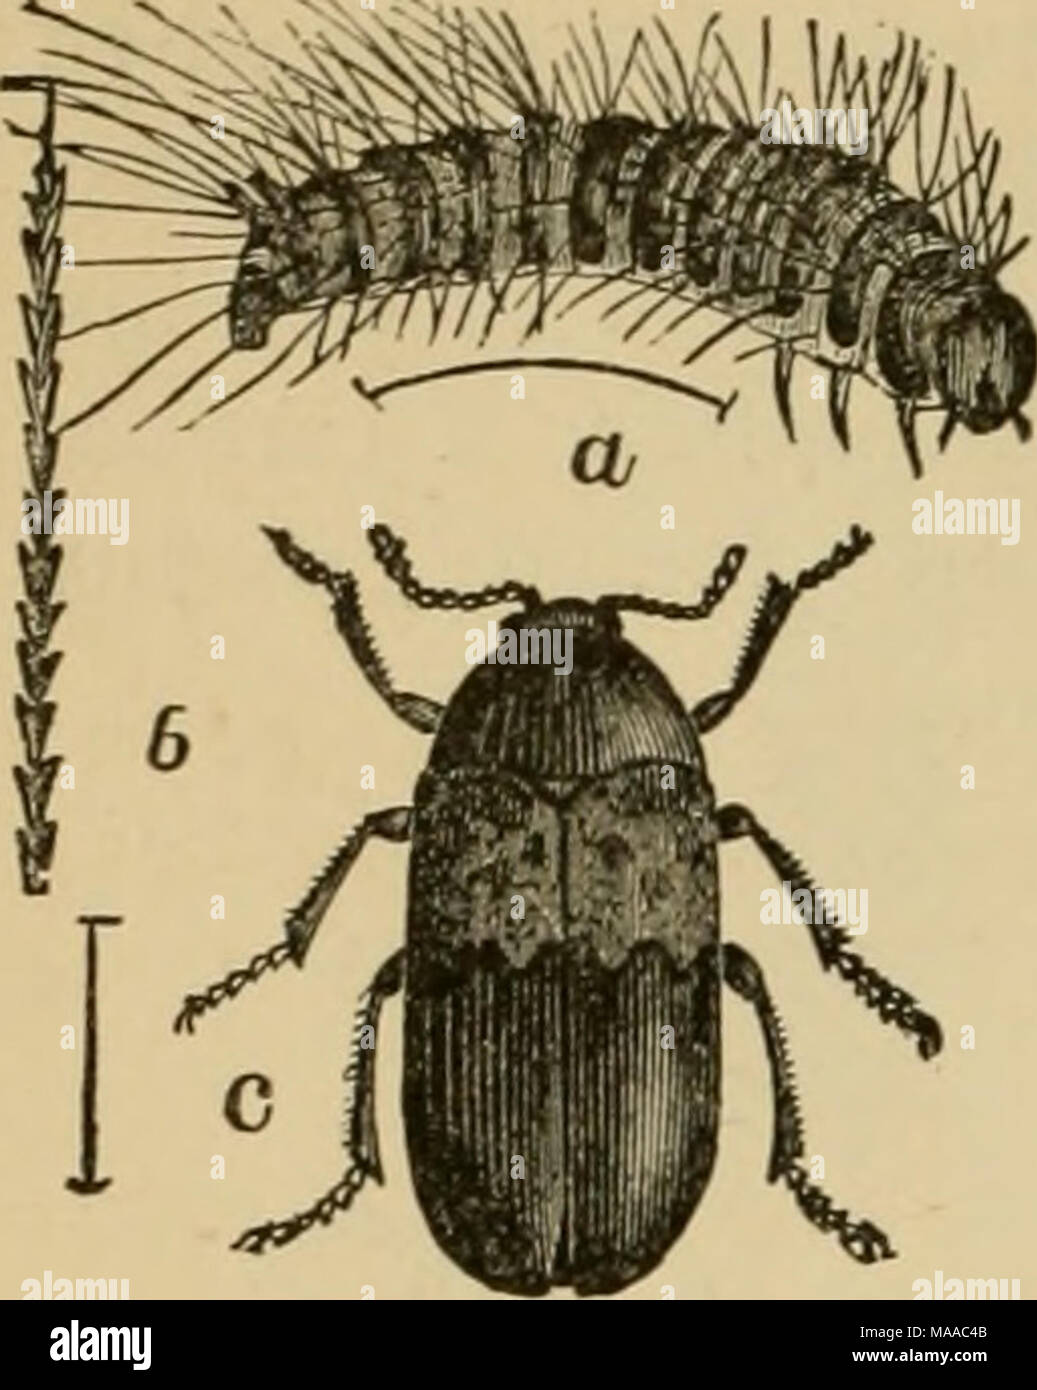 . Economic entomology for the farmer and the fruit grower, and for use as a text-book in agricultural schools and colleges; . The larder-beetle, Dermes- tes lardariiis.—a, la'rva ; b, a single hair from larva ; c, adult beetle. These belong to the family Dermcstidce, which contains such nuisances as the &quot;larder-beetles,&quot; &quot;carpet-beetles,&quot; and &quot;mu- seum-beetles.&quot; The elytra, which cover the abdomen completely, are black or gray, usually ornamented with white or colored scales, which sometimes form quite pretty markings. The &quot;larder-beetle,&quot; or &quot;bacon Stock Photo